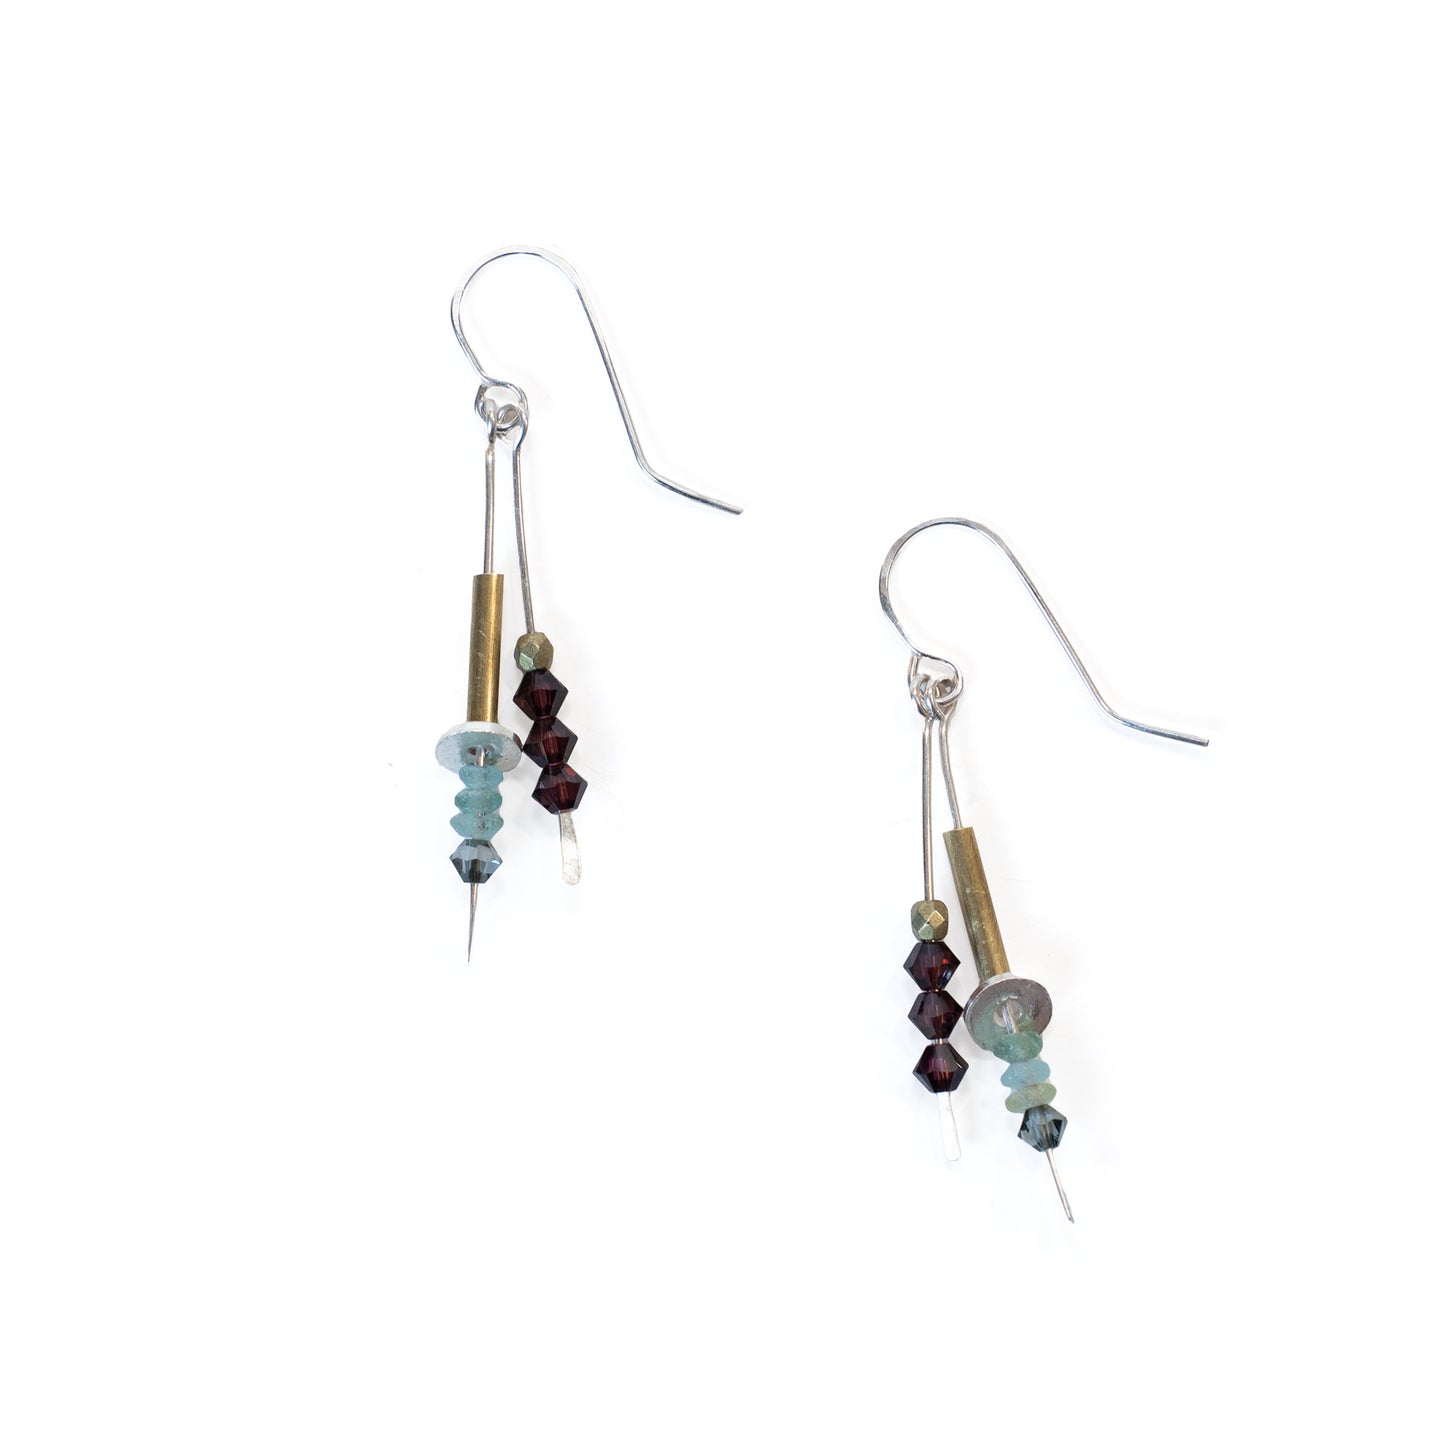 Sterling Silver 2 Bar Dangling Earrings with Swarovski Crystal Beads and Gold Bars